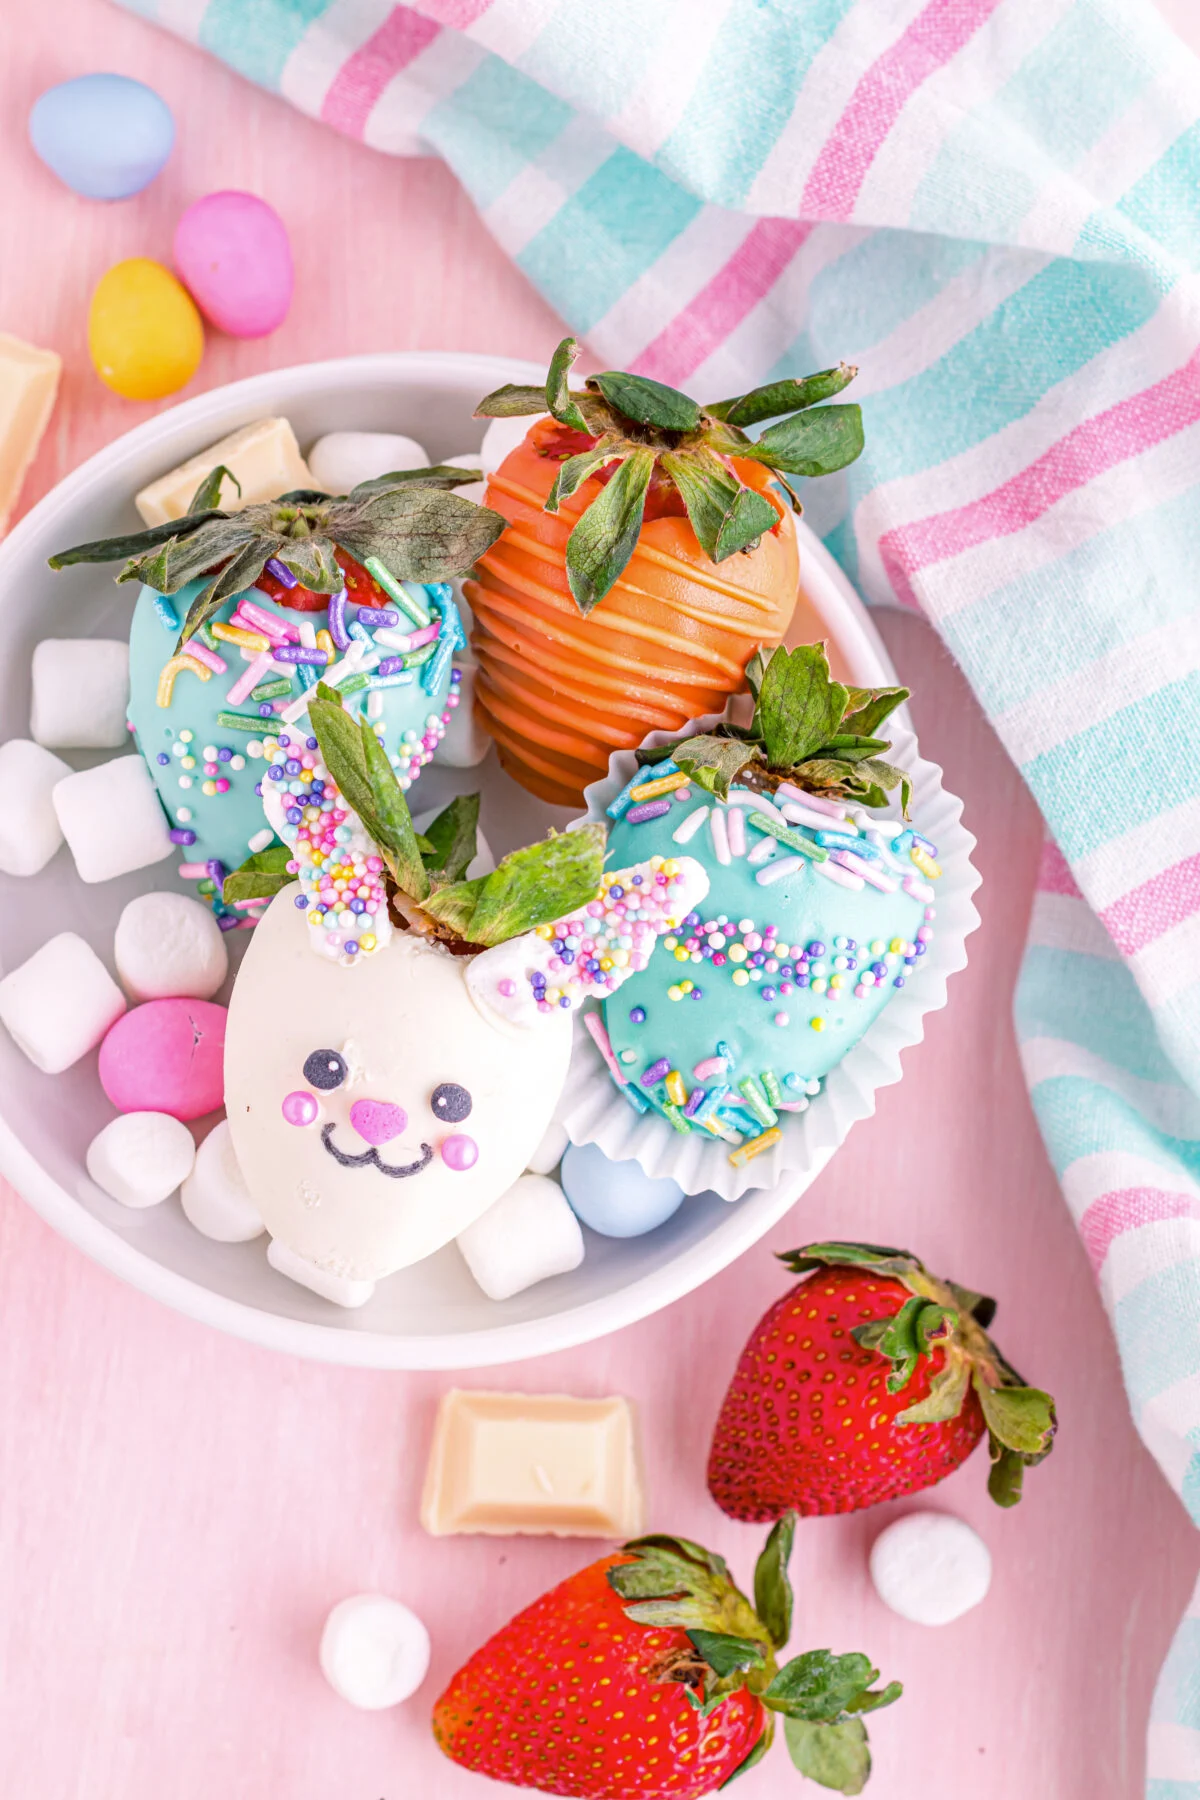 Looking for a delicious and easy Easter dessert? Check out our step-by-step guide to making Easter chocolate covered strawberries.